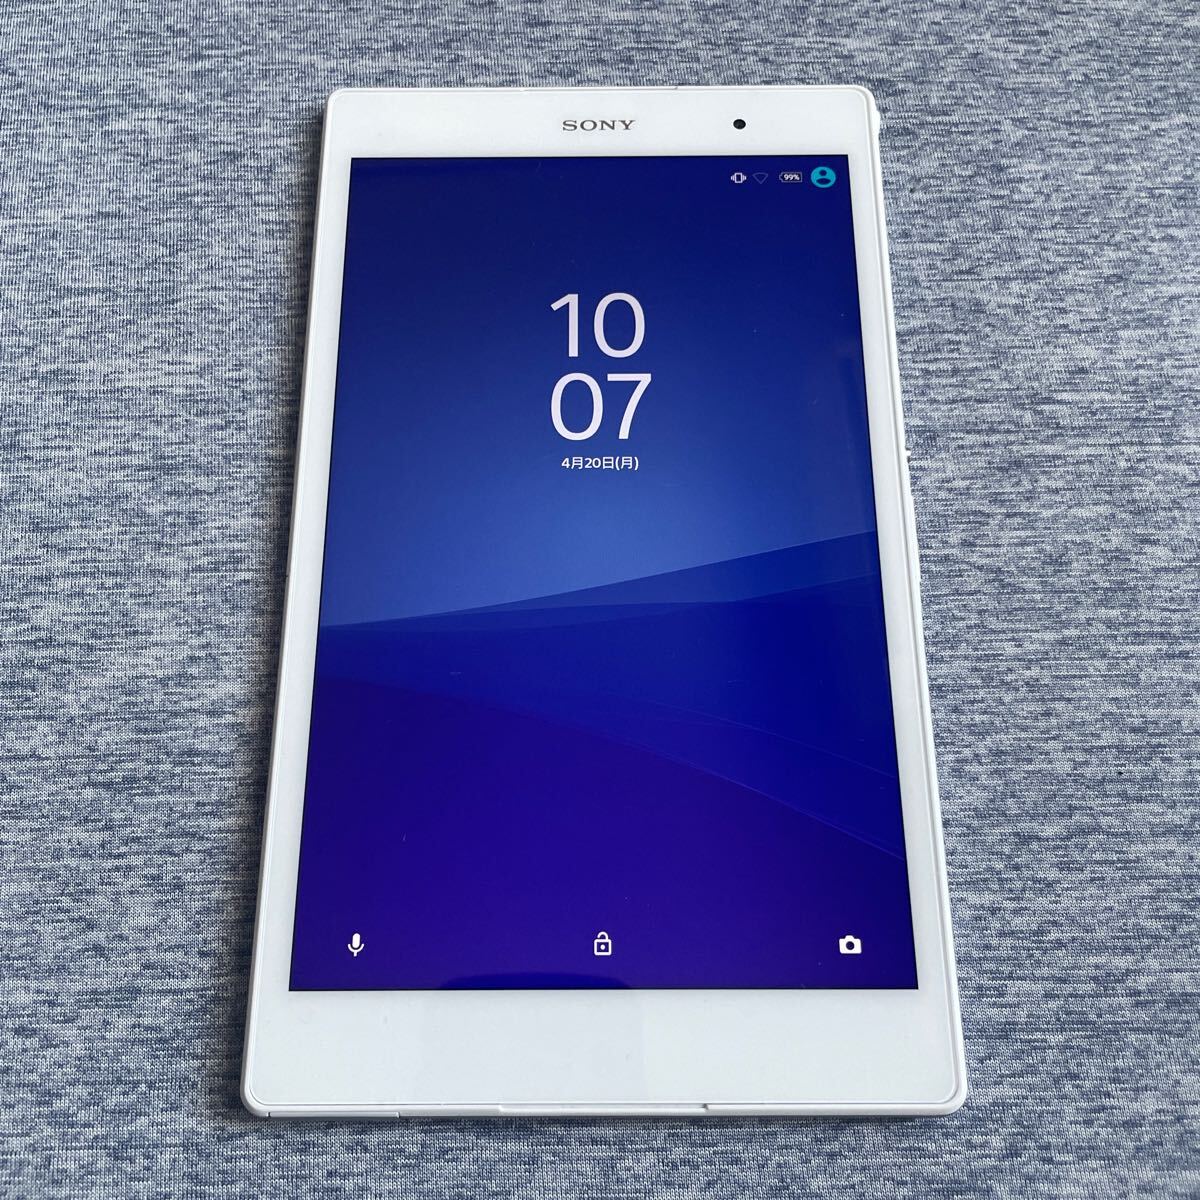 SONY Xperia Z3 Tablet Compact Wi-Fiモデル 16GB SGP611JP_画像1